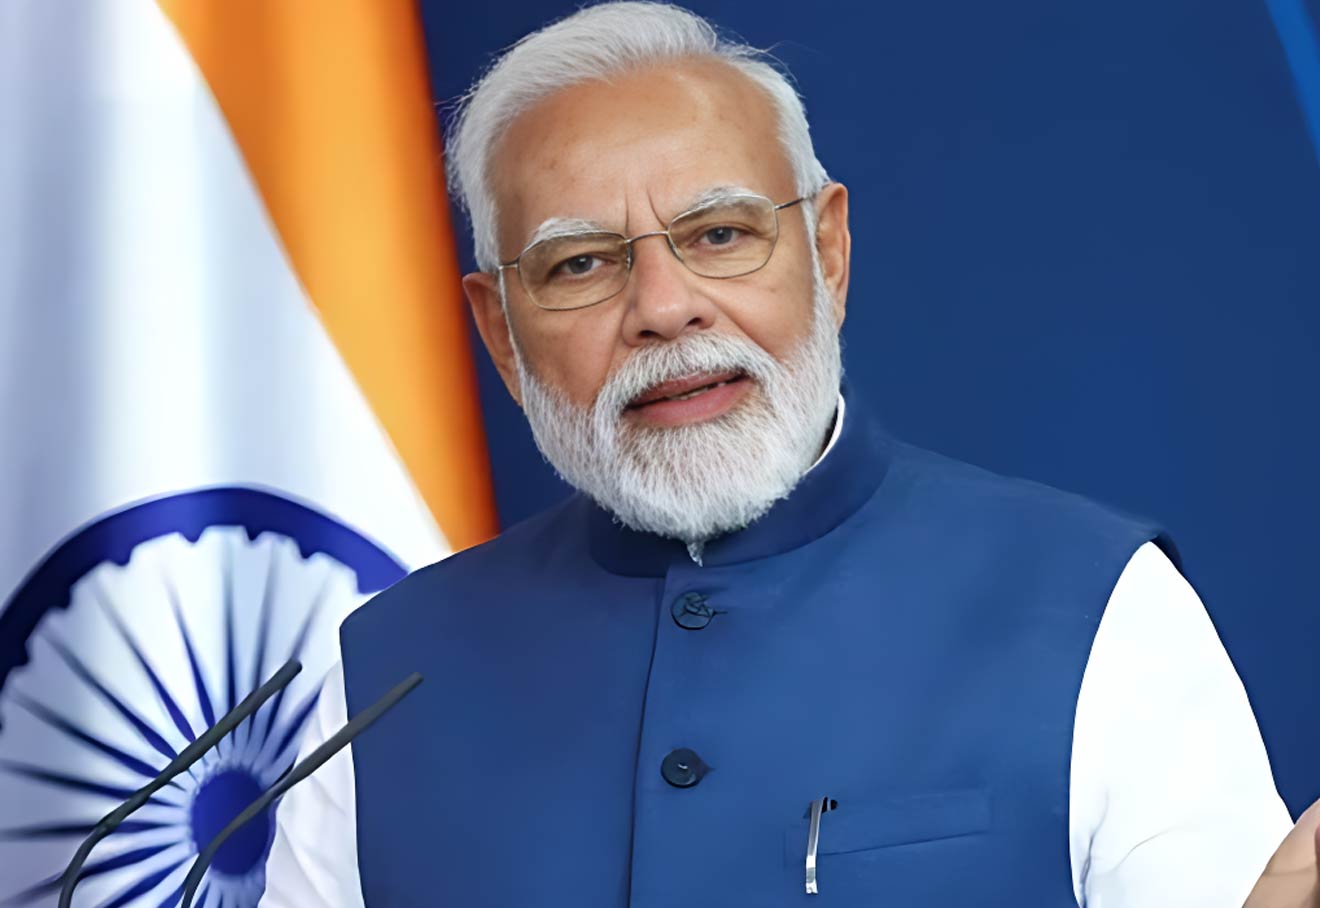 PM Modi To Lay Foundation Stone Of Several Projects In MP, Chhattisgarh Including Mega Industrial Park in Ratlam on Sept 14